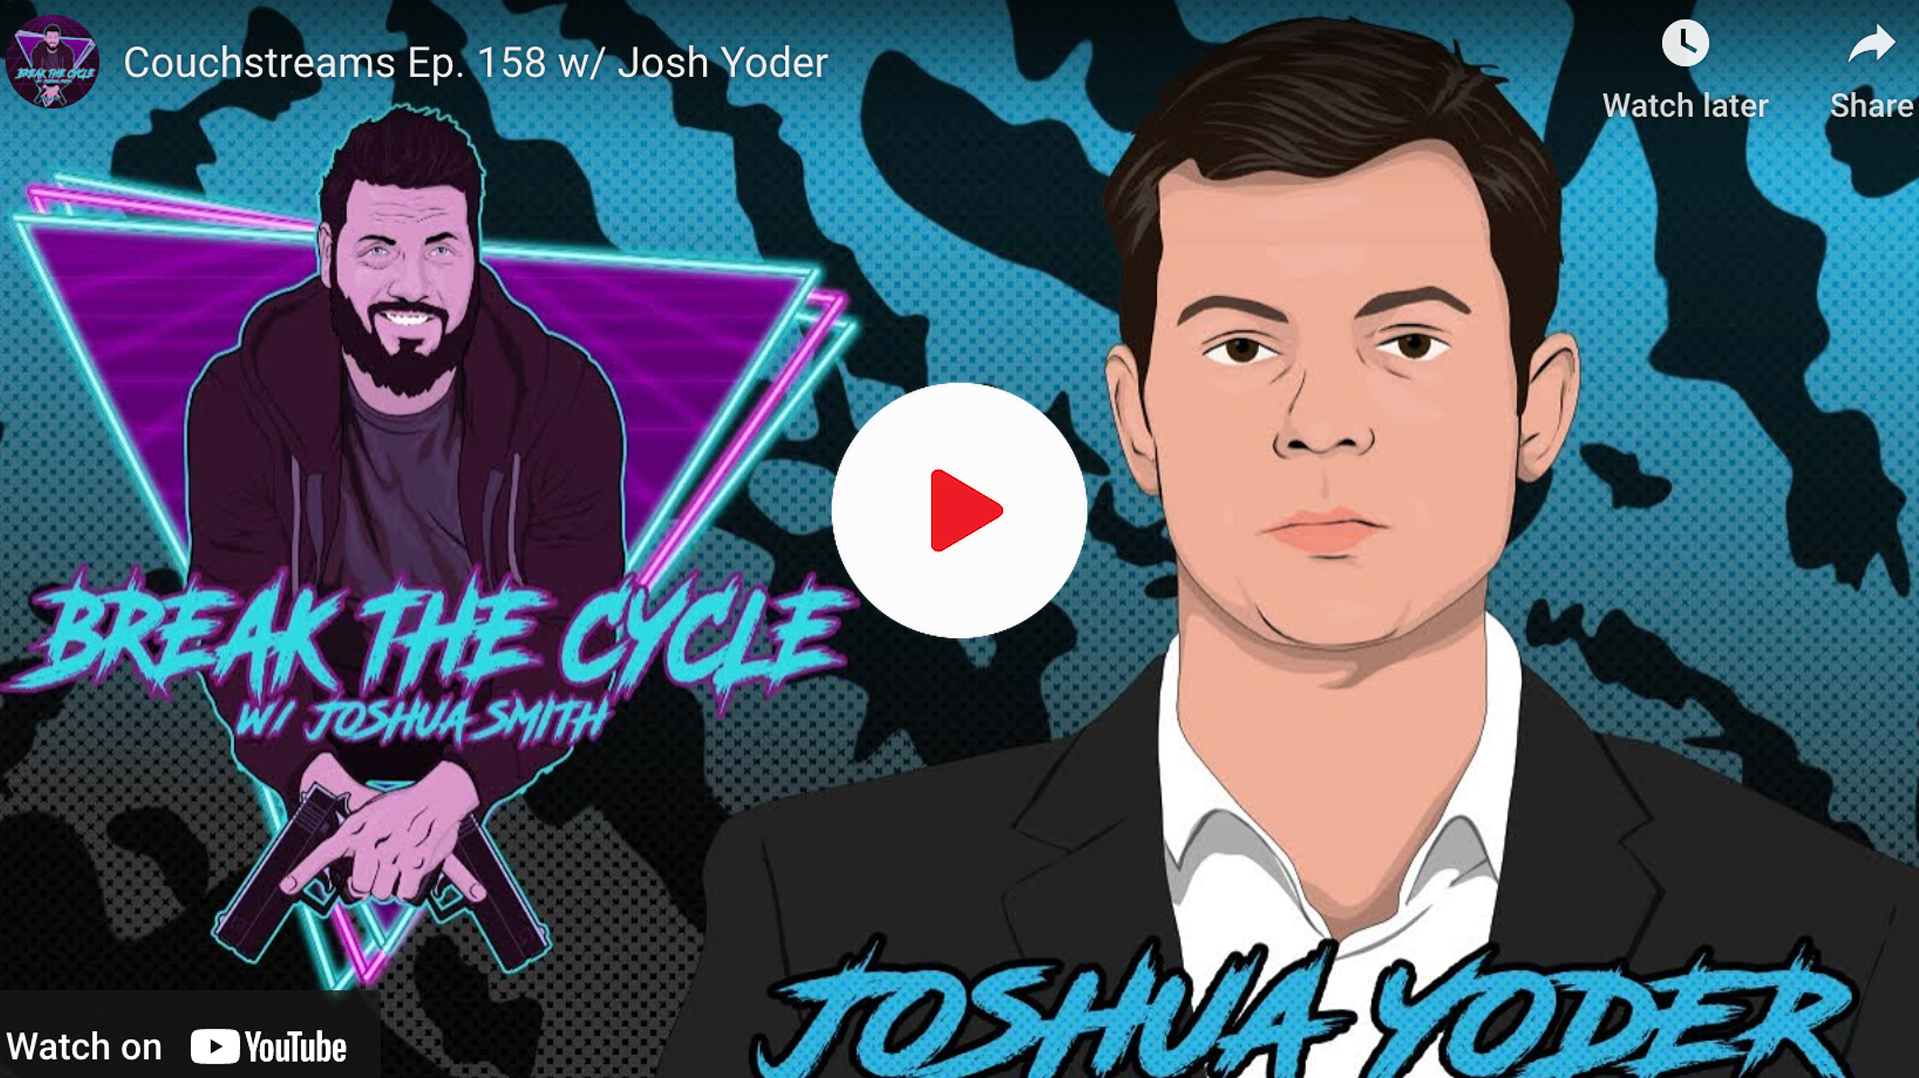 Break the Cycle with Joshua Smith- couchstreams ep 158 with Josh Yoder